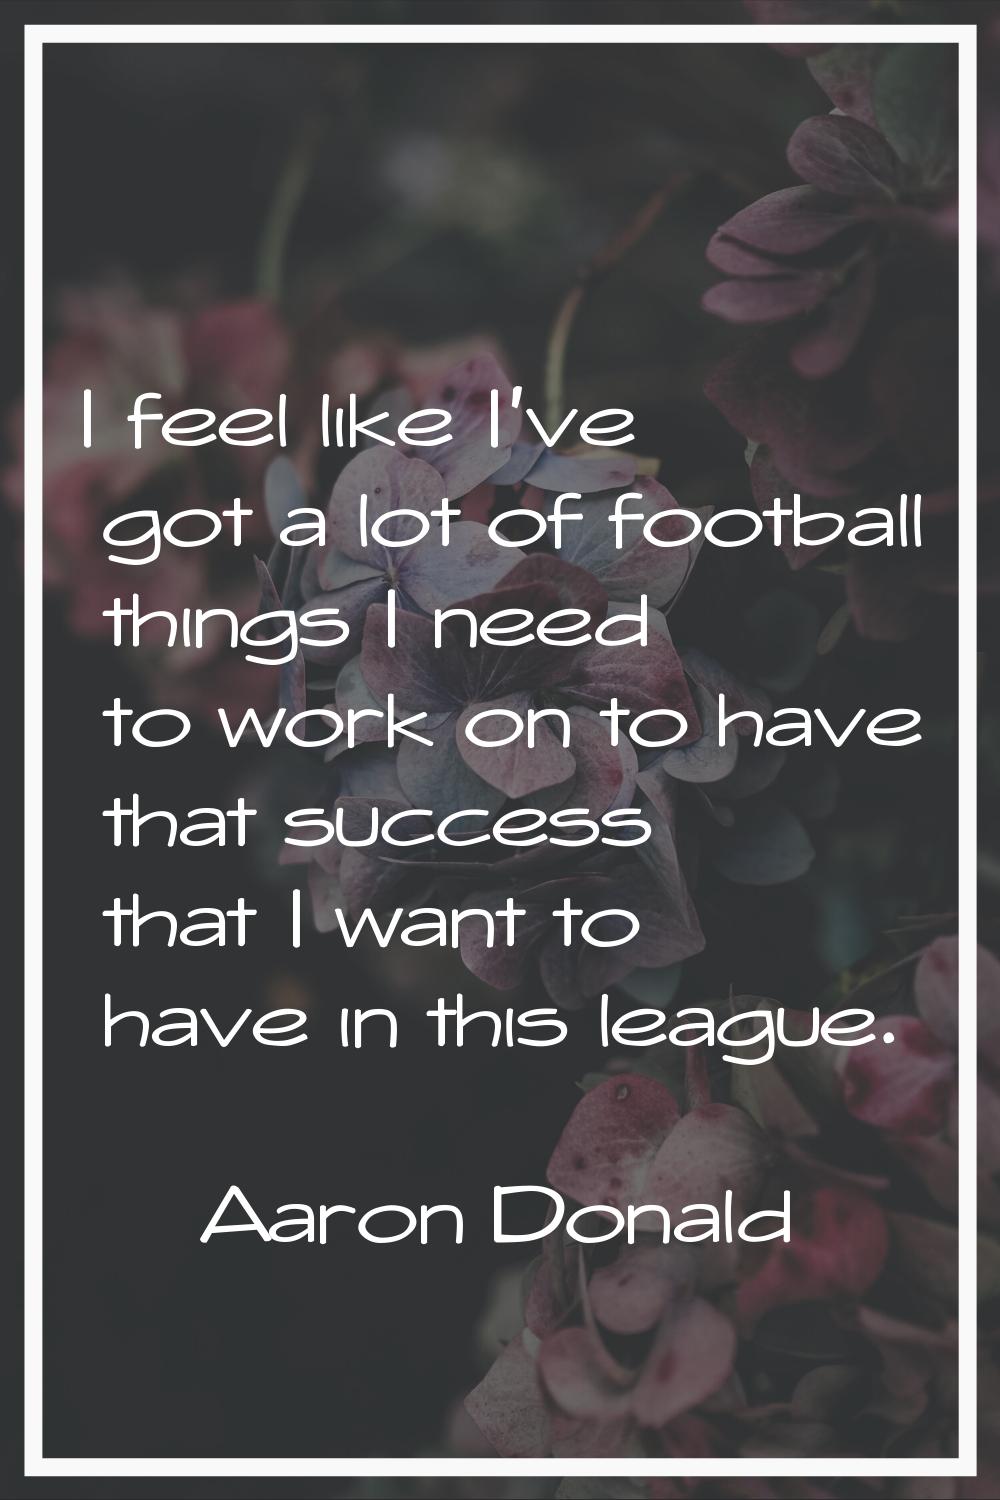 I feel like I've got a lot of football things I need to work on to have that success that I want to